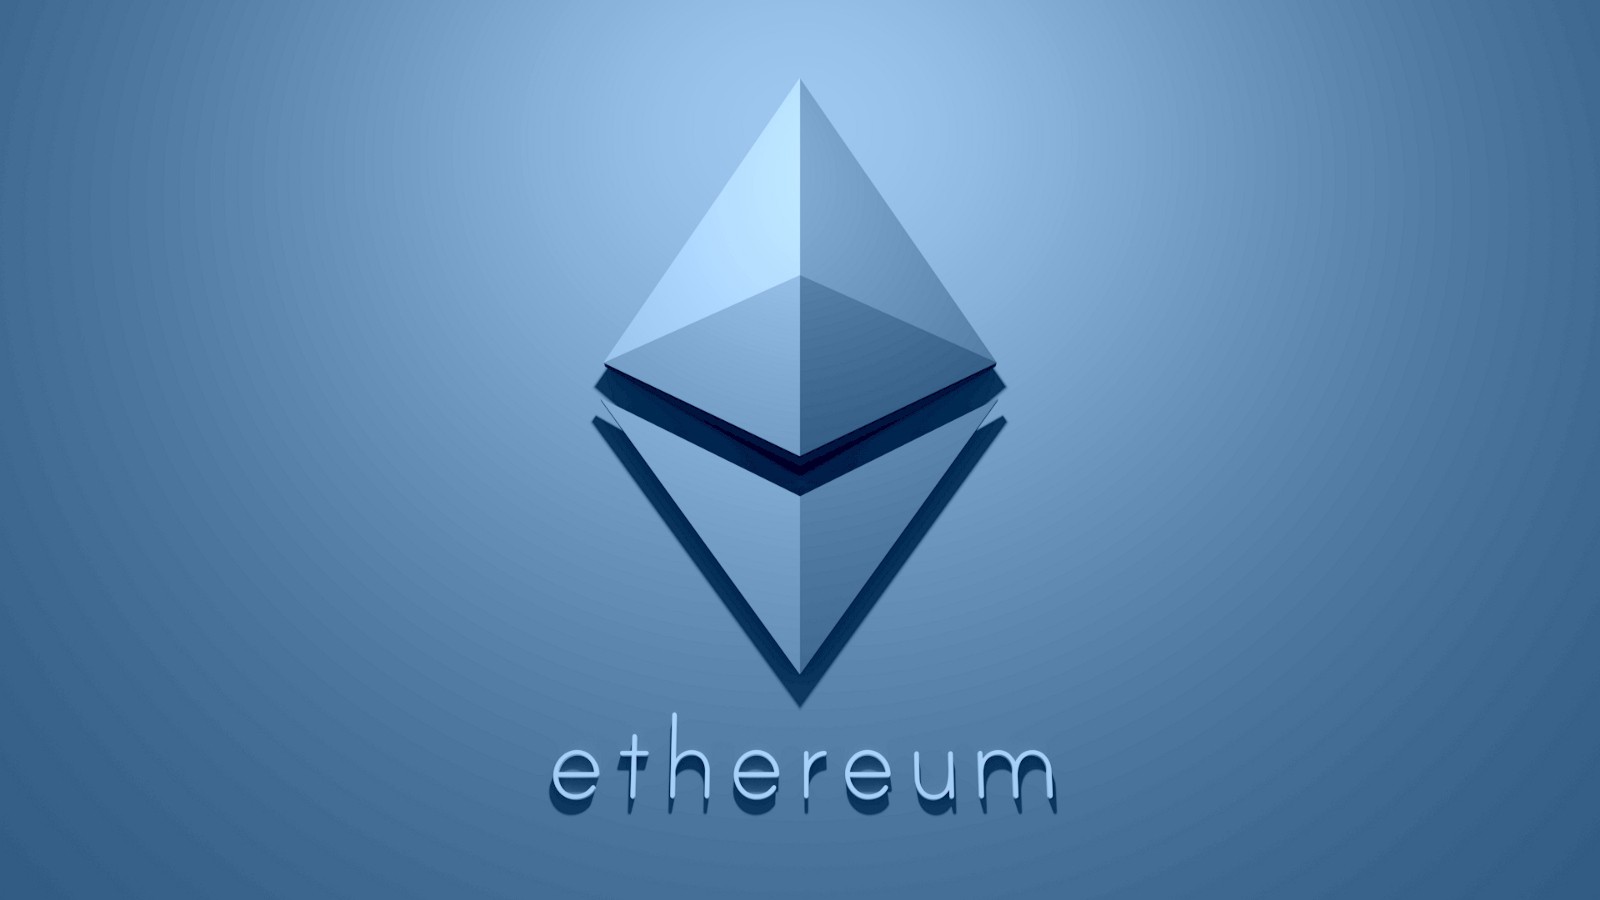 Ether (ETH) Price - Buy, Sell & View The Price of Ether Crypto | Gemini